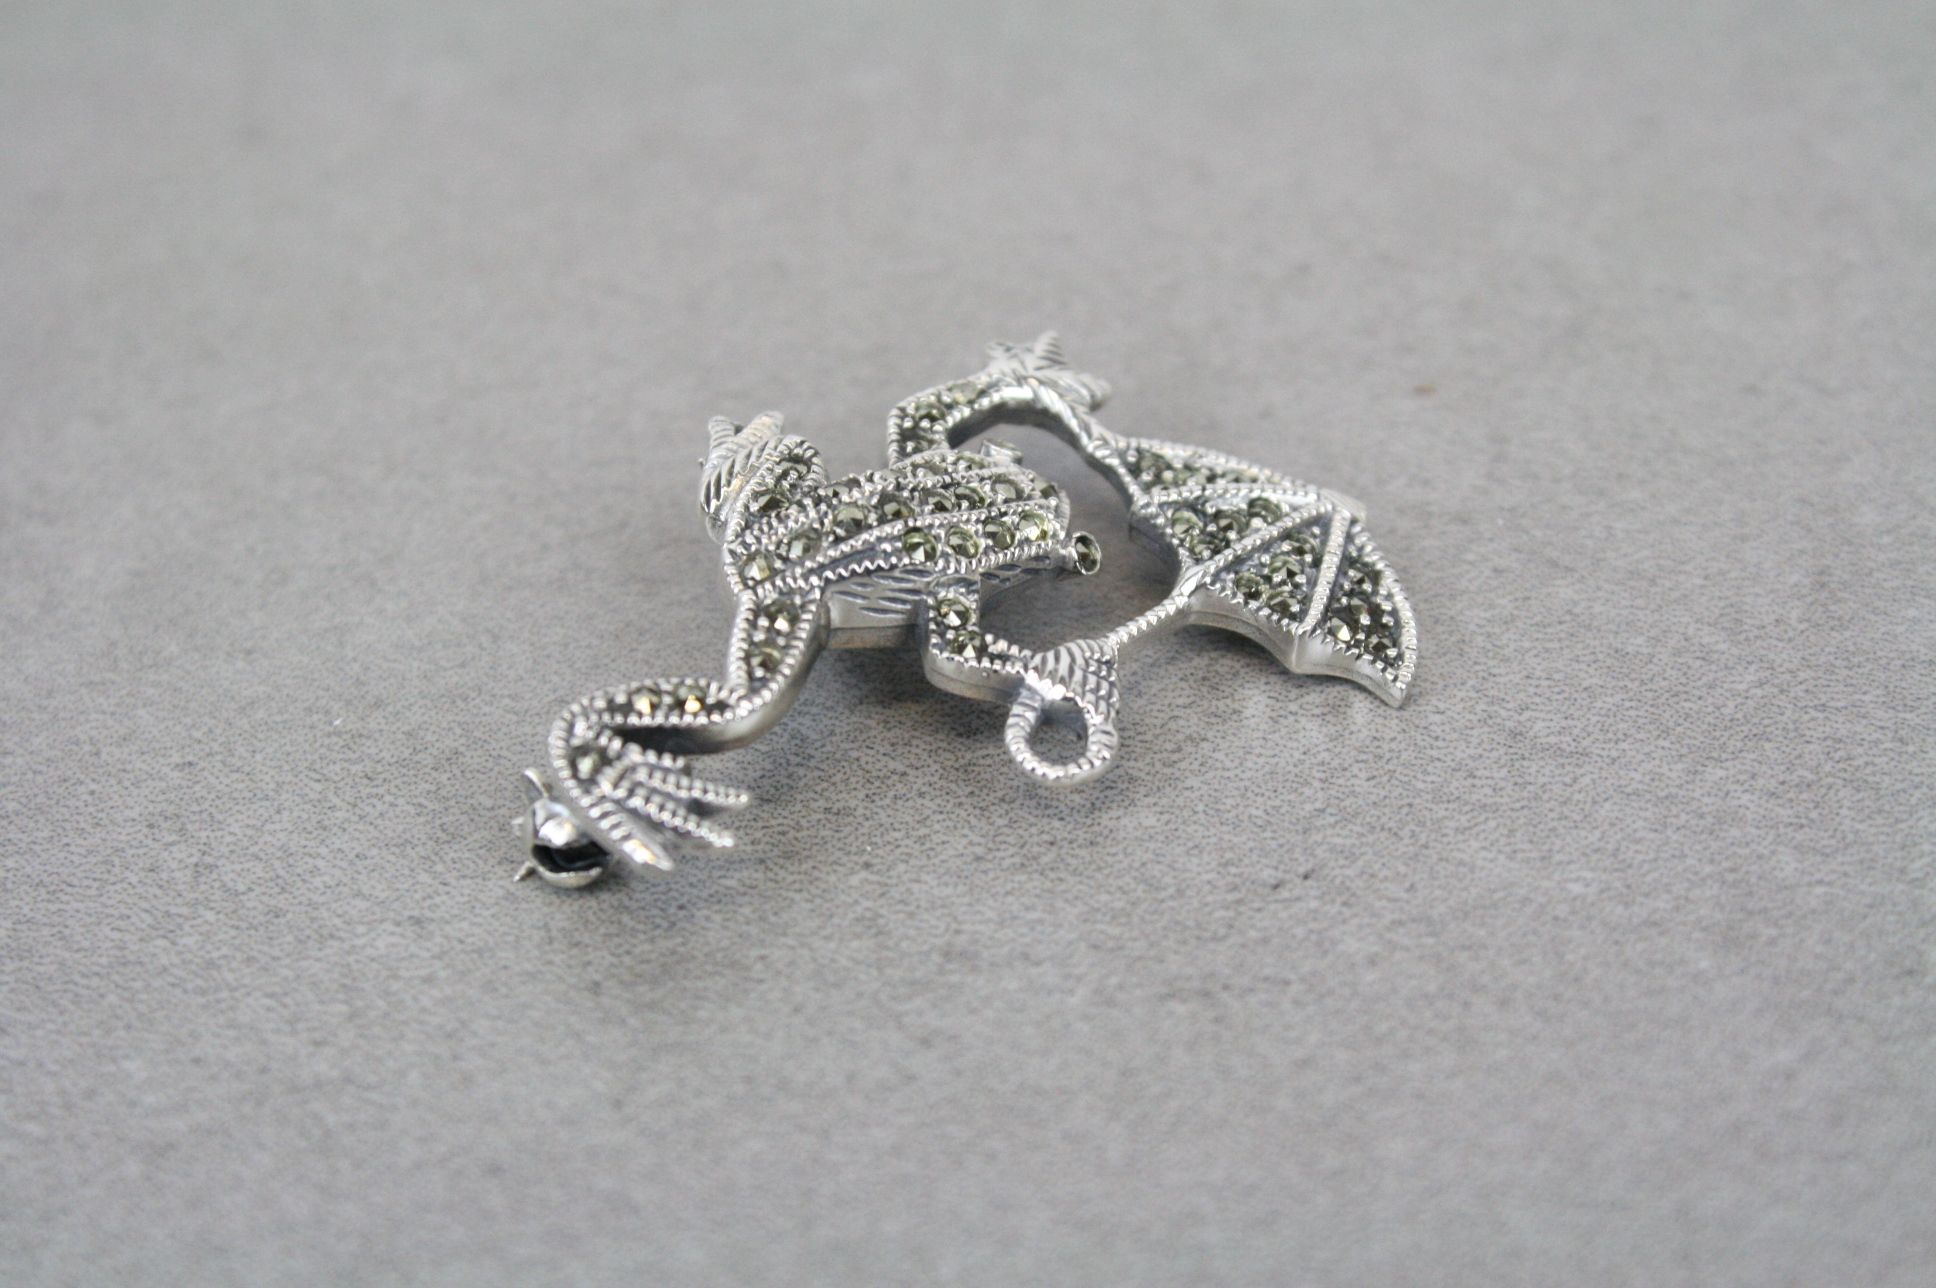 Silver and Marcasite lizard brooch with umbrella